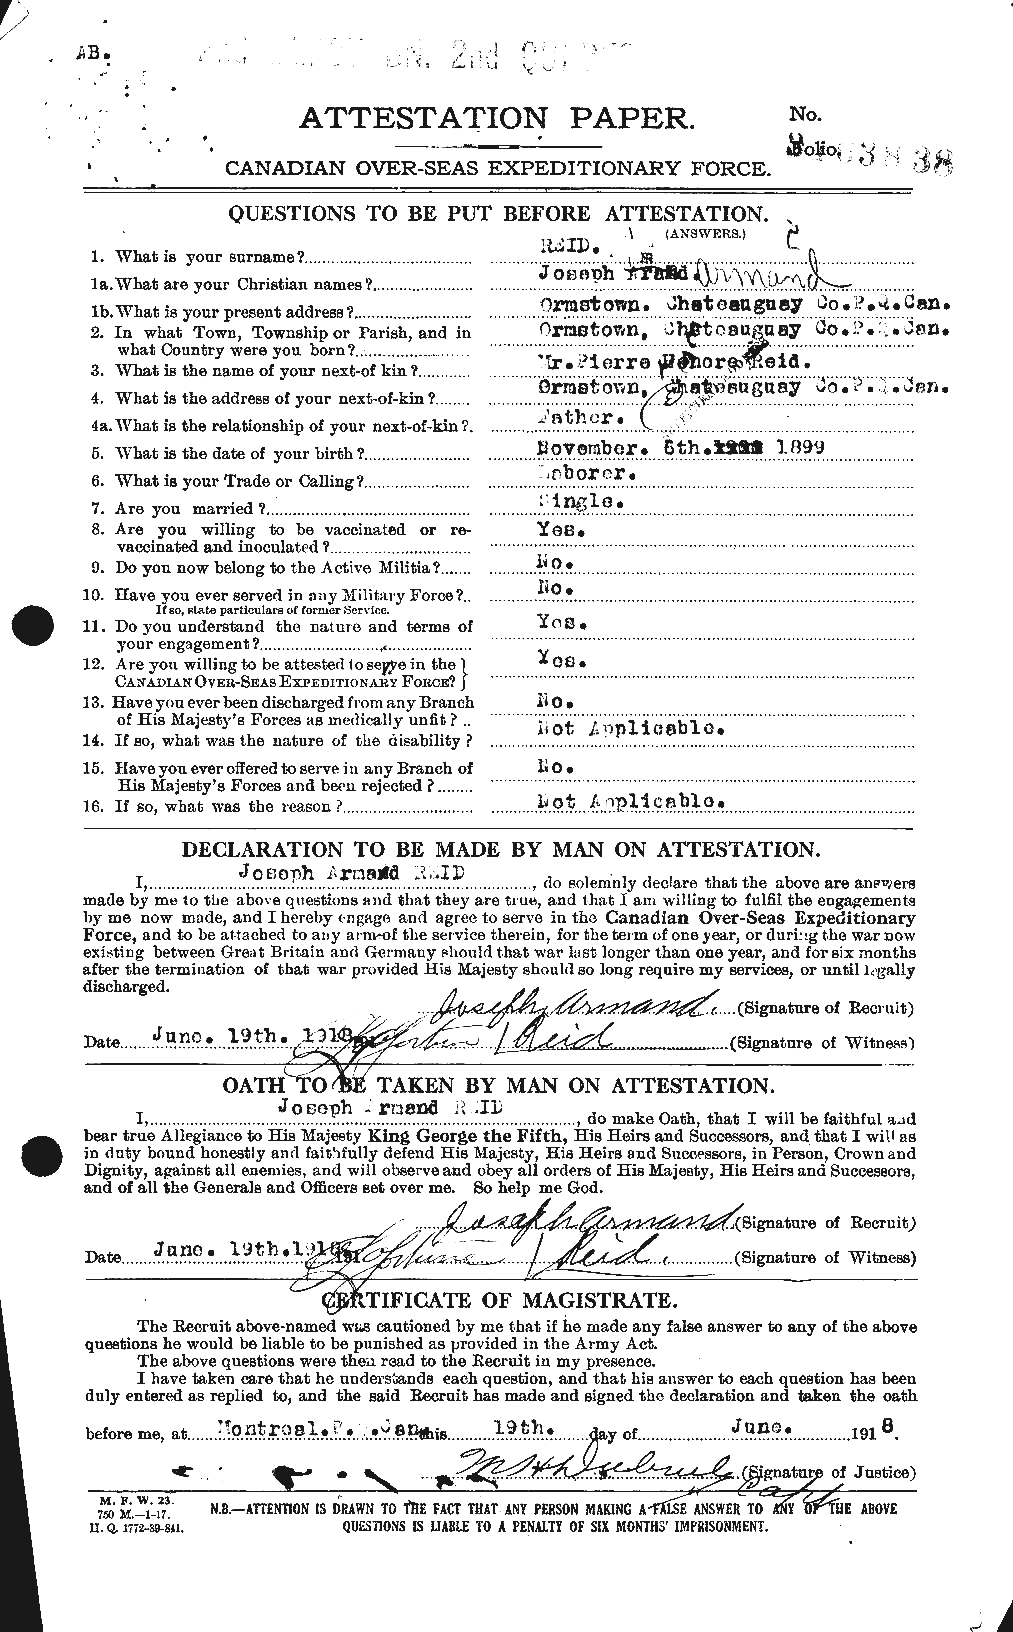 Personnel Records of the First World War - CEF 598895a